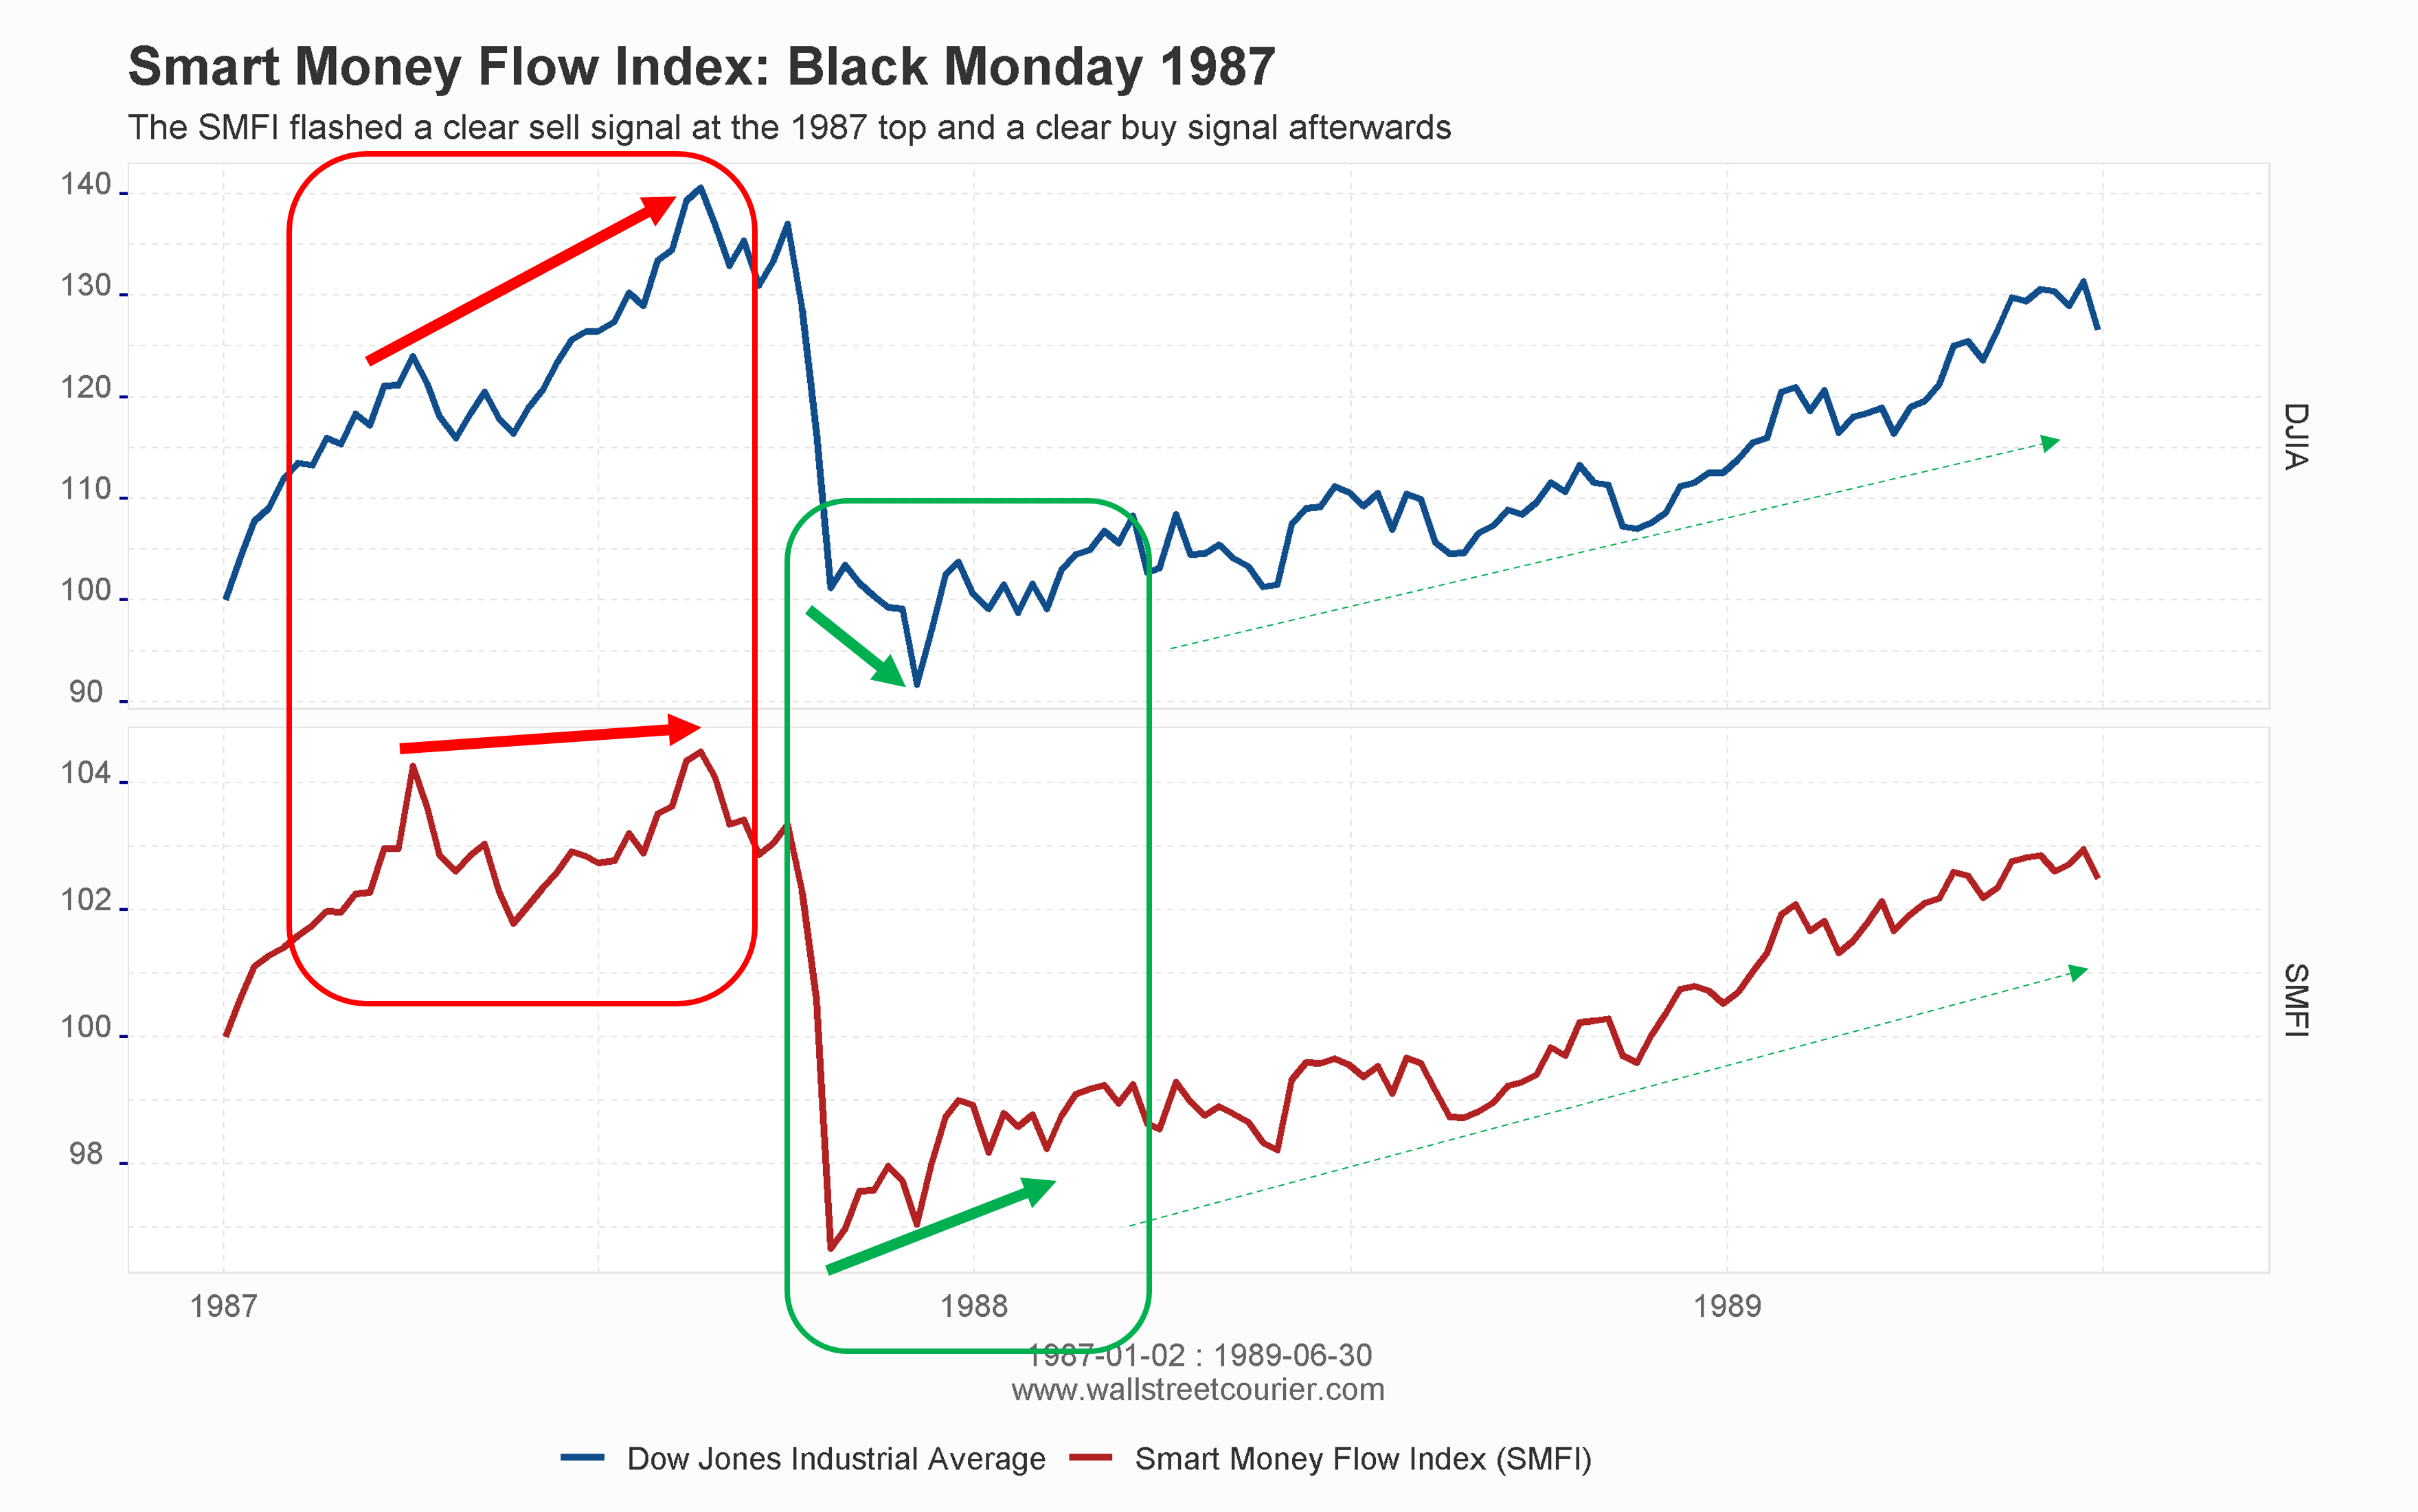 Chart highlighting the Smart Money Flow Index's ability to send clear warning signals before major market crashes, such as the 1987 crash, by showing negative divergences to the Dow Jones Industrial Average